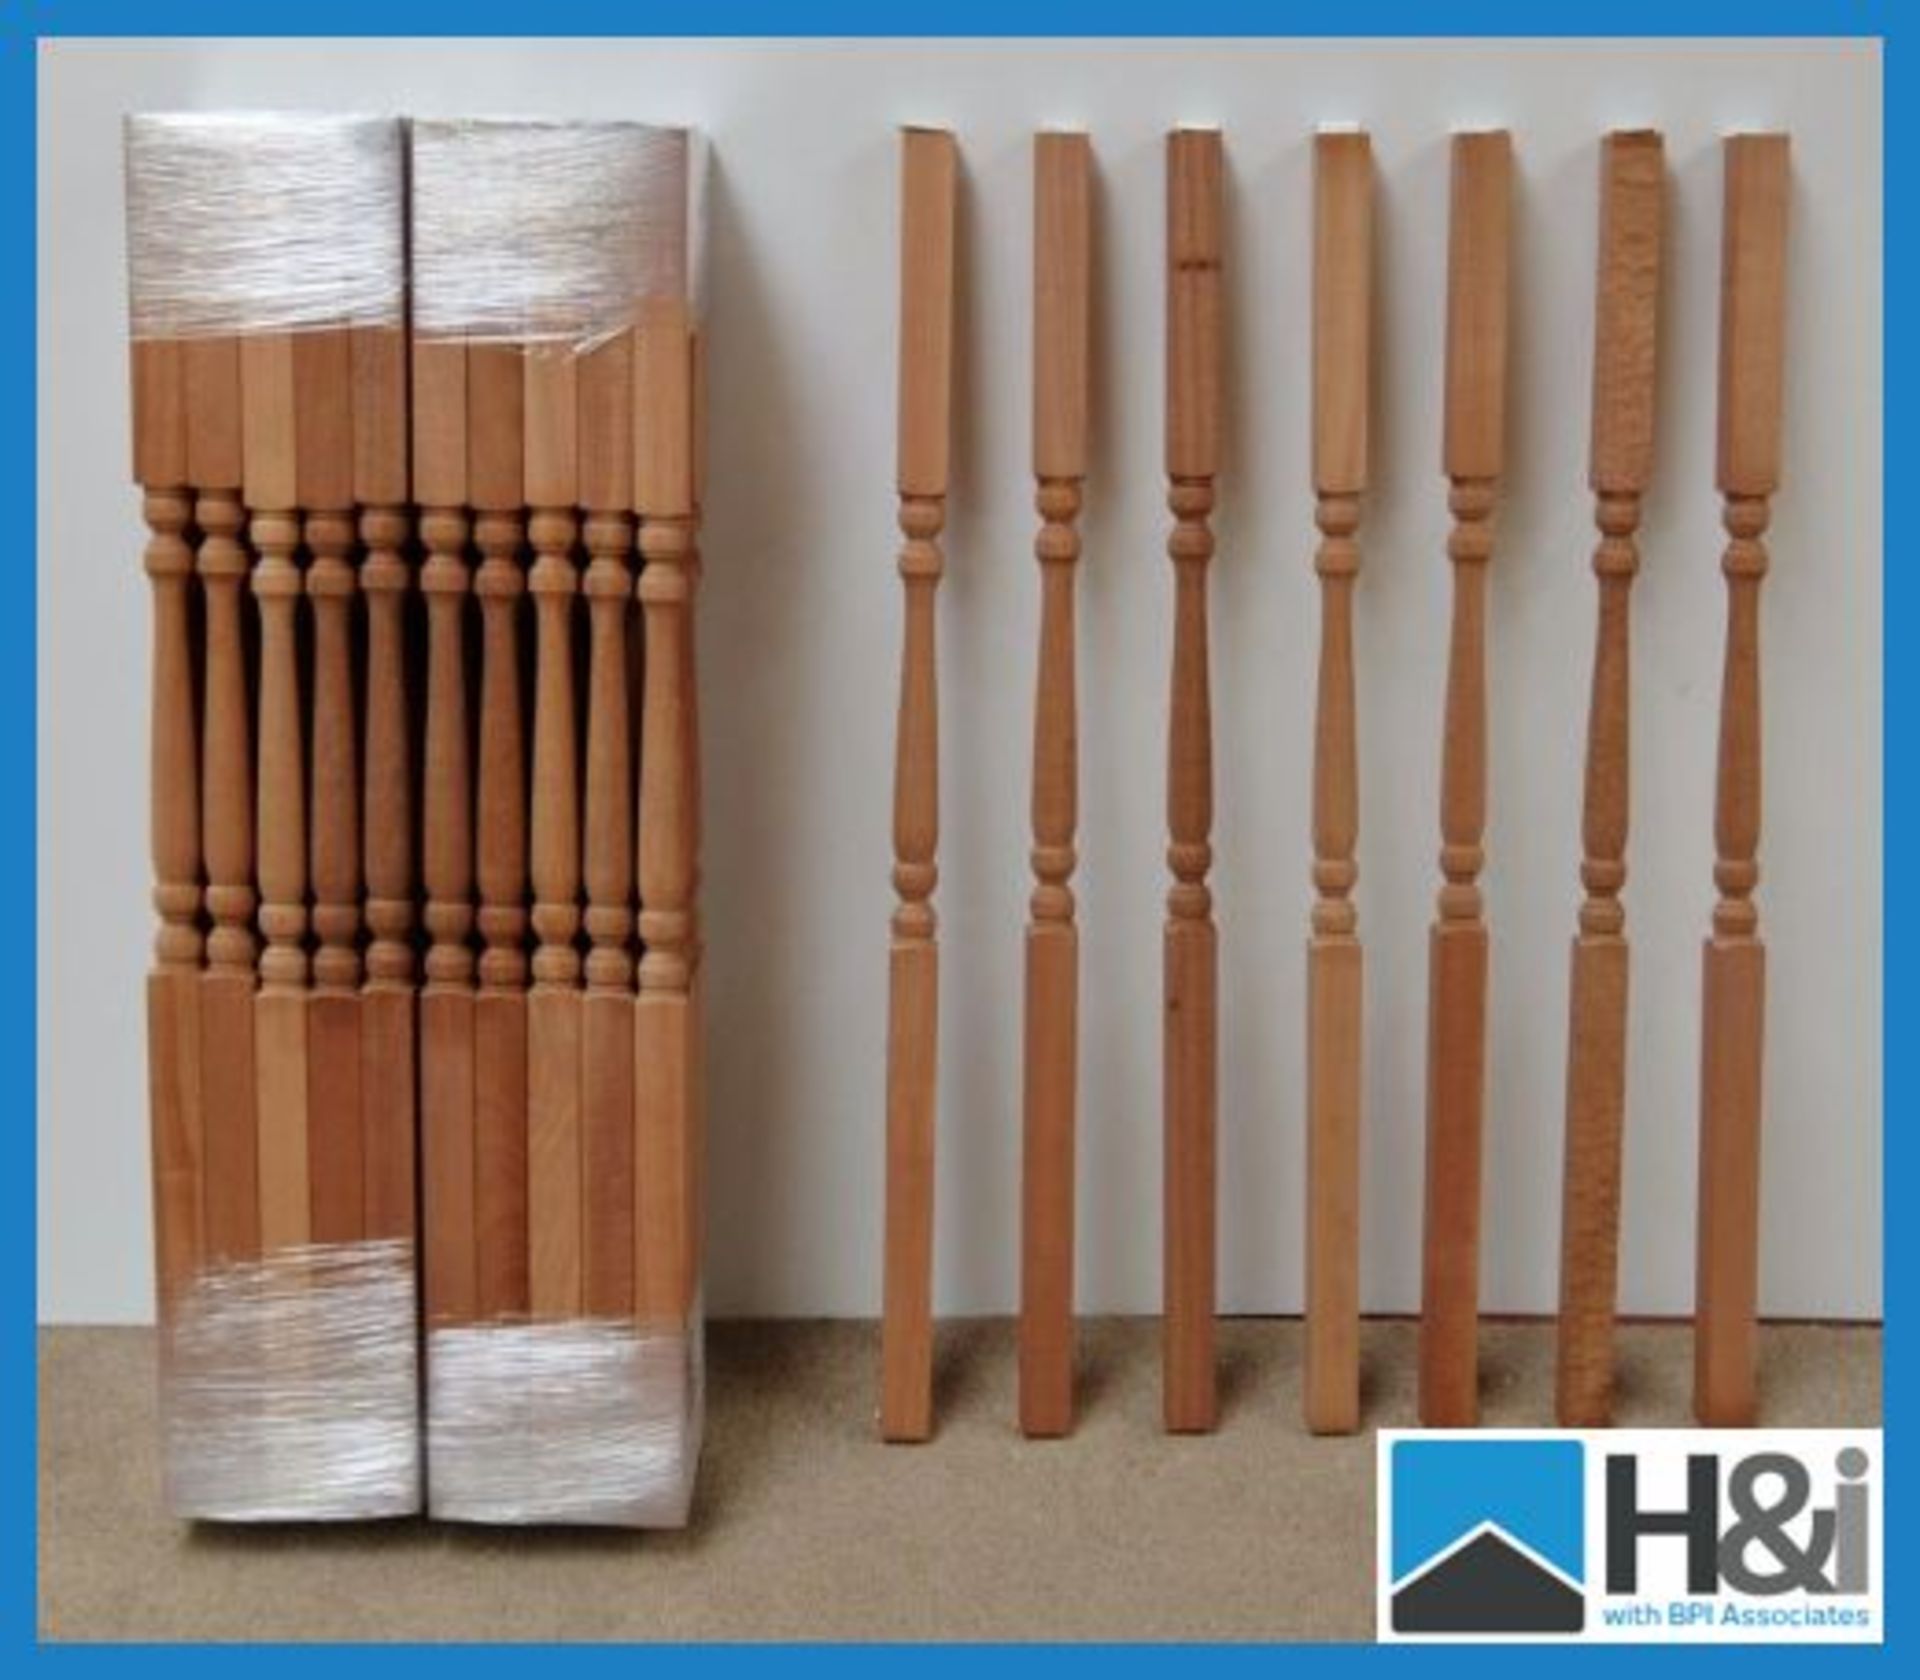 50 x Brand new Sapele hardwood stair spindles Colonian Edwardian style Turned 41mm can be used